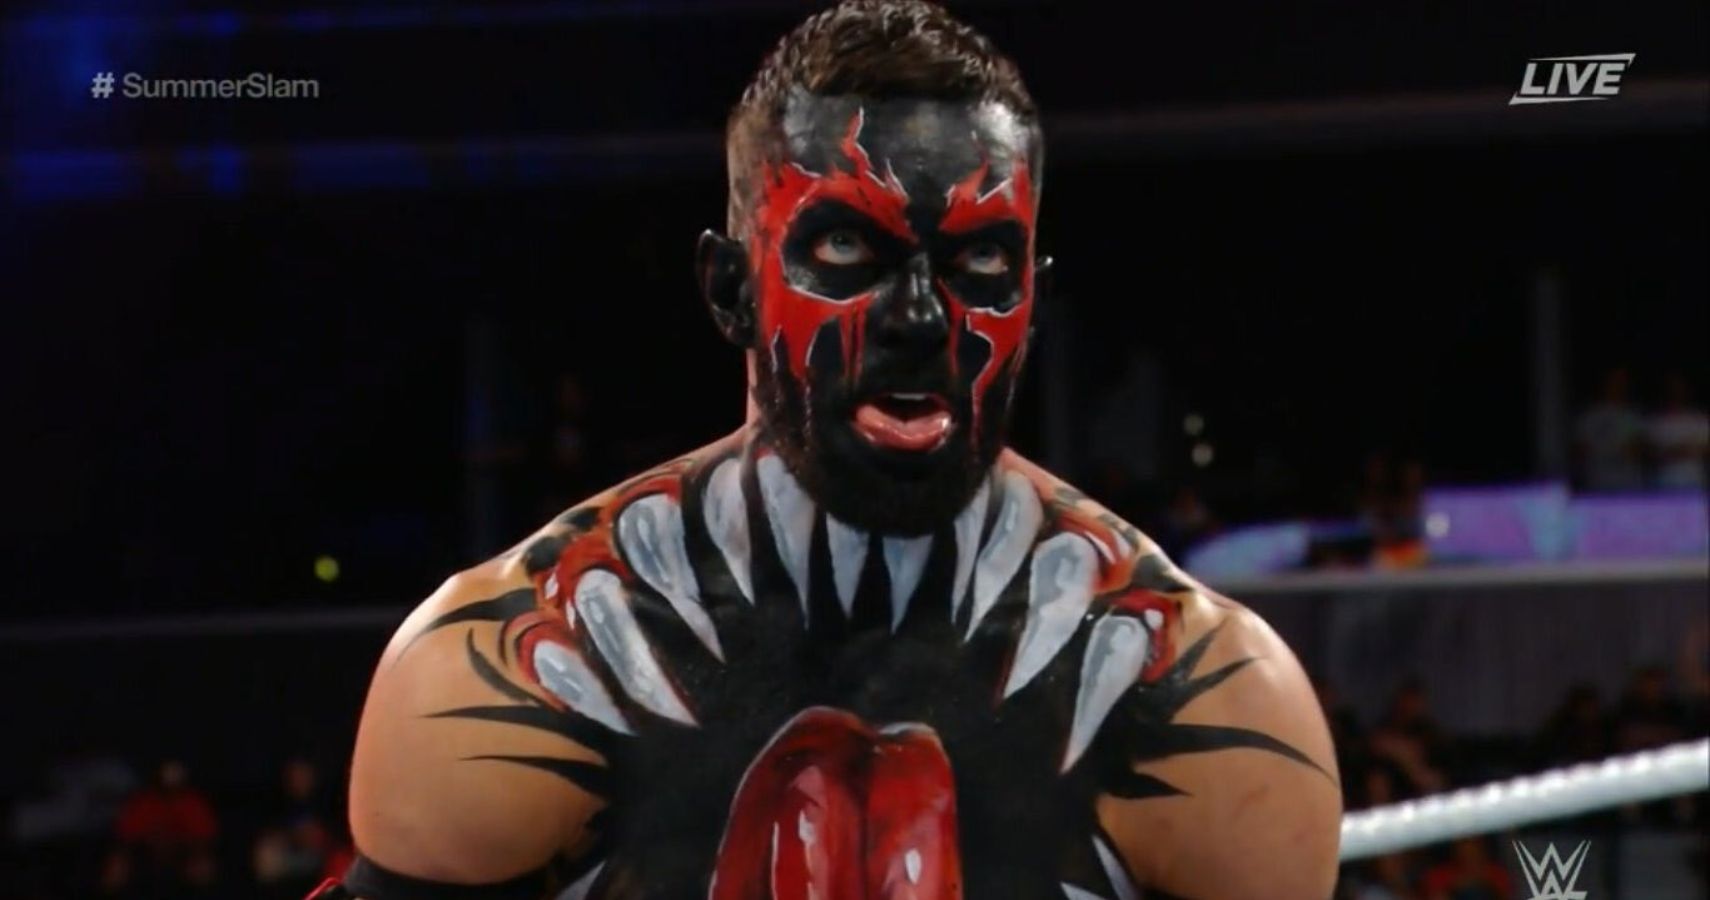 [Rumor] There Are No Plans To Bring Finn Balor's Demon King Back